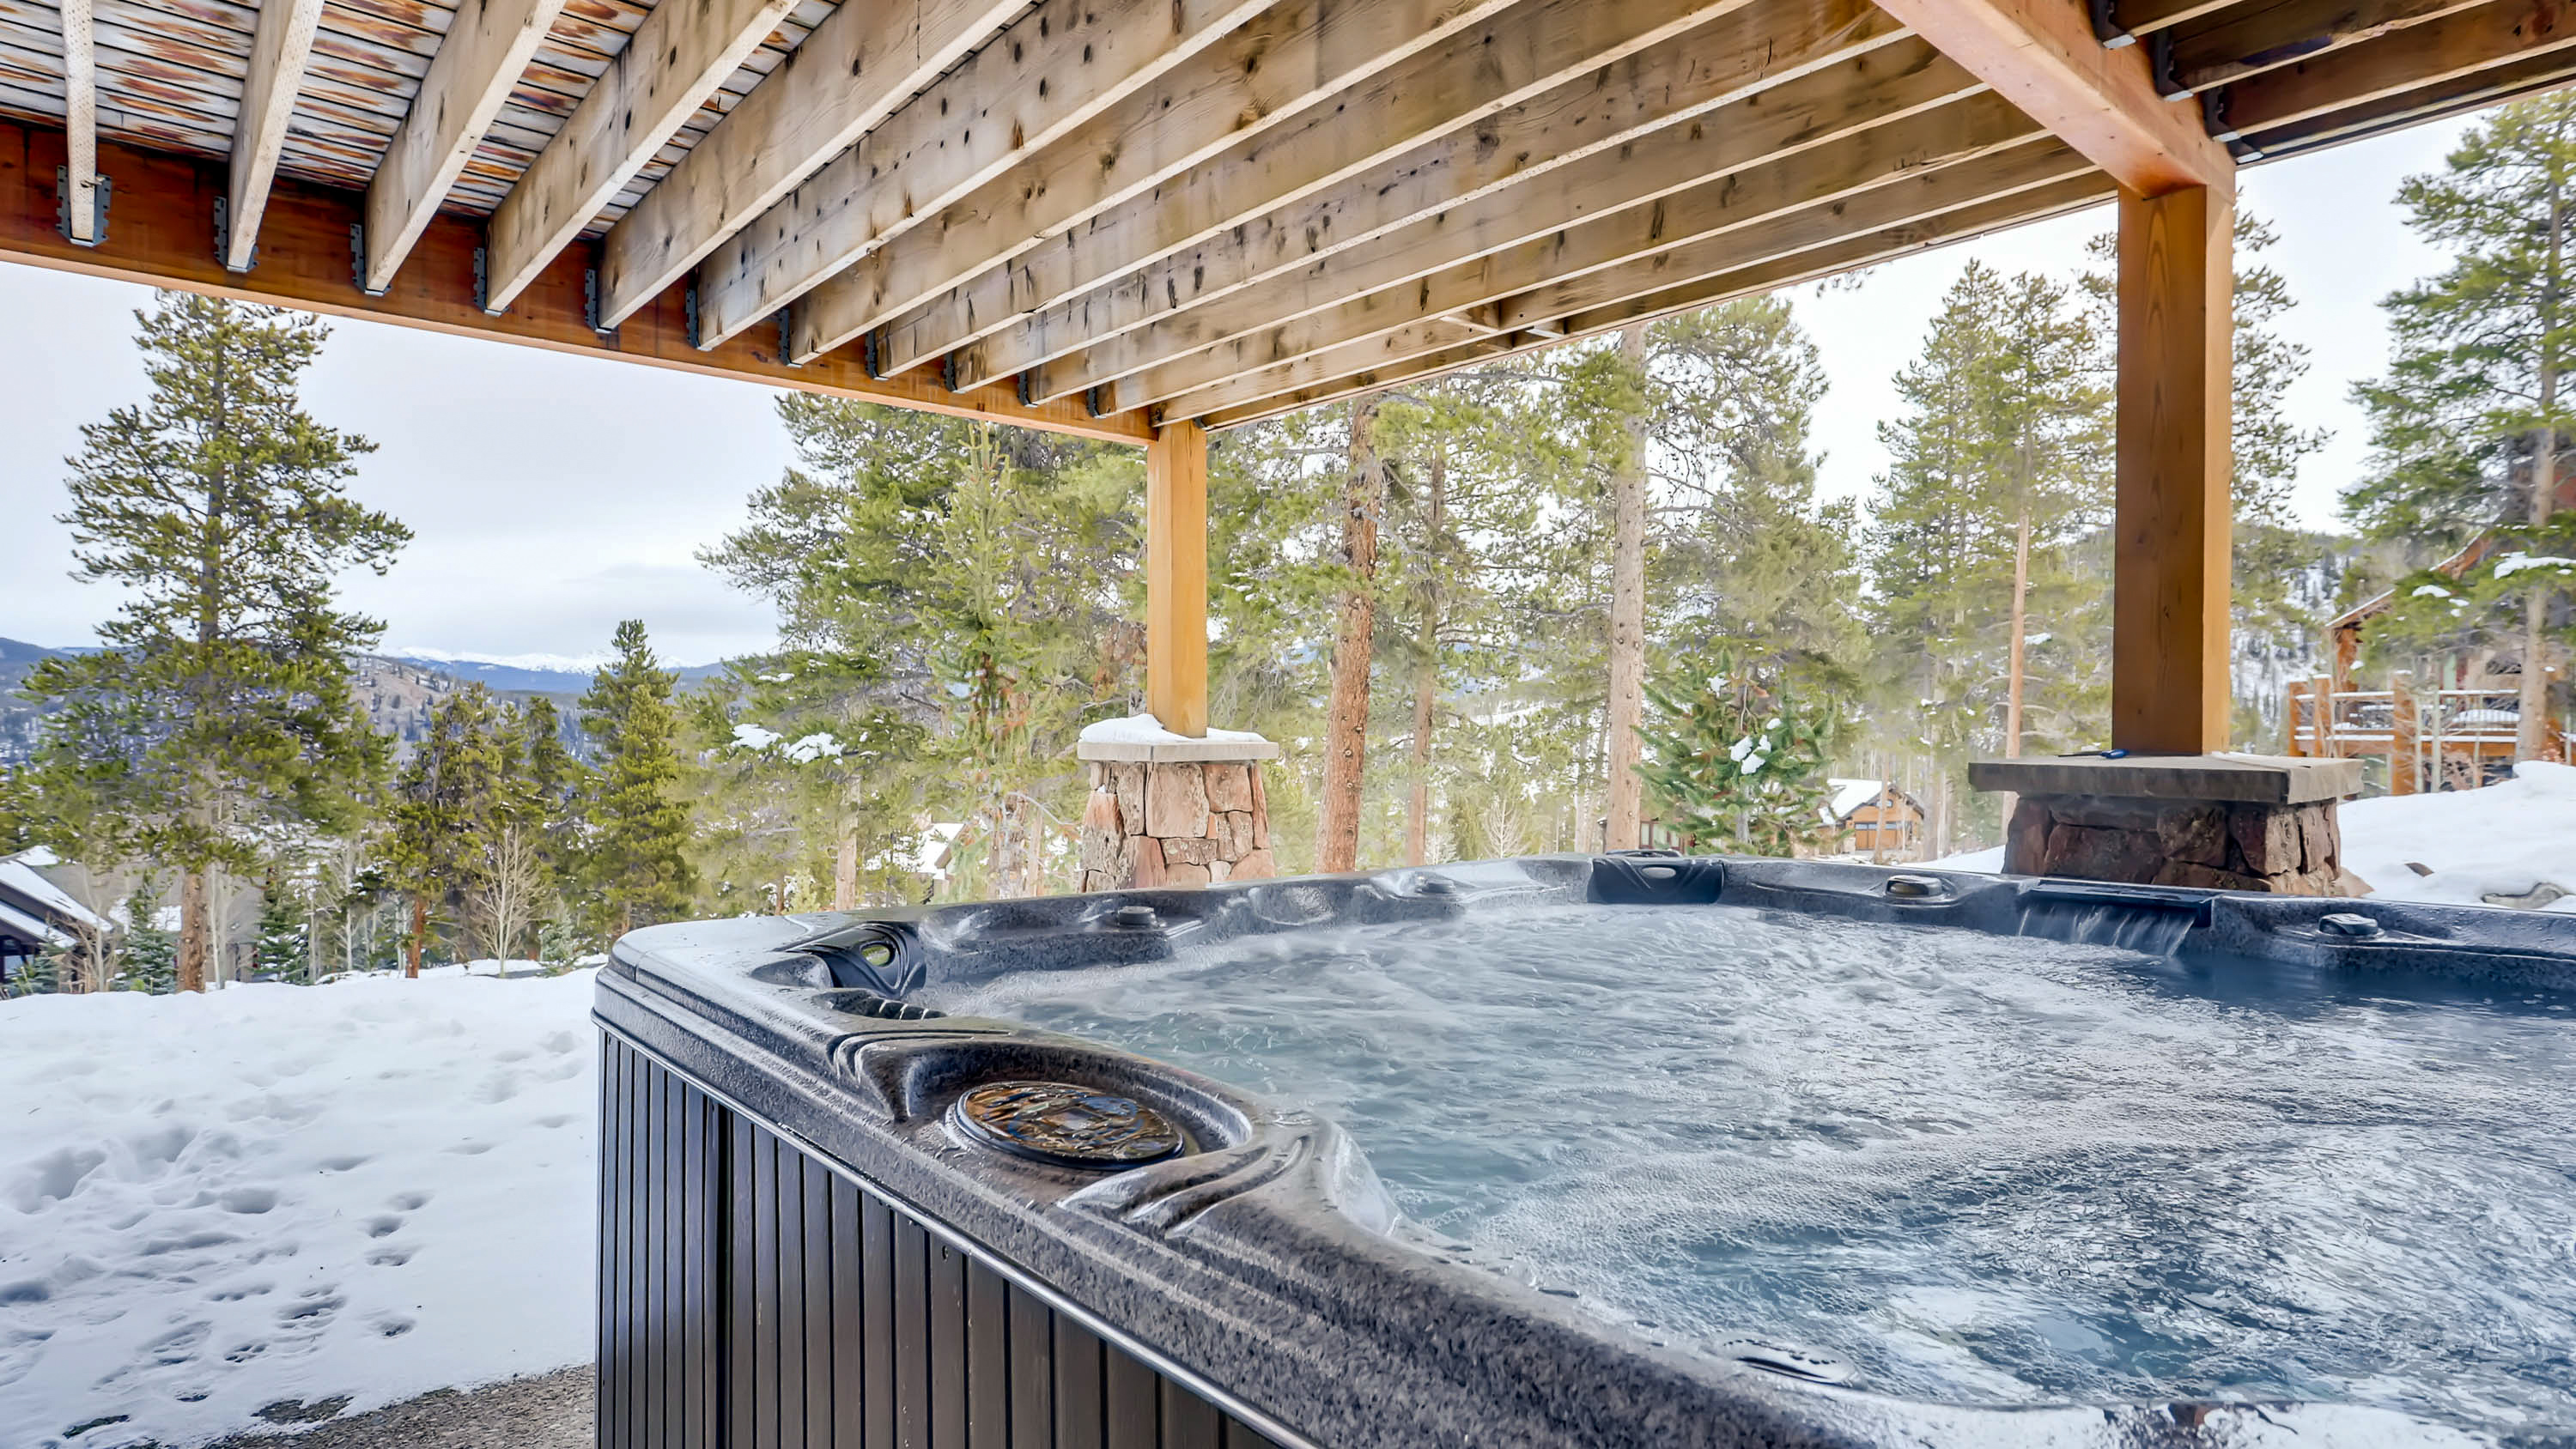 Soak away your tired muscles at the end of the day in your private hot tub